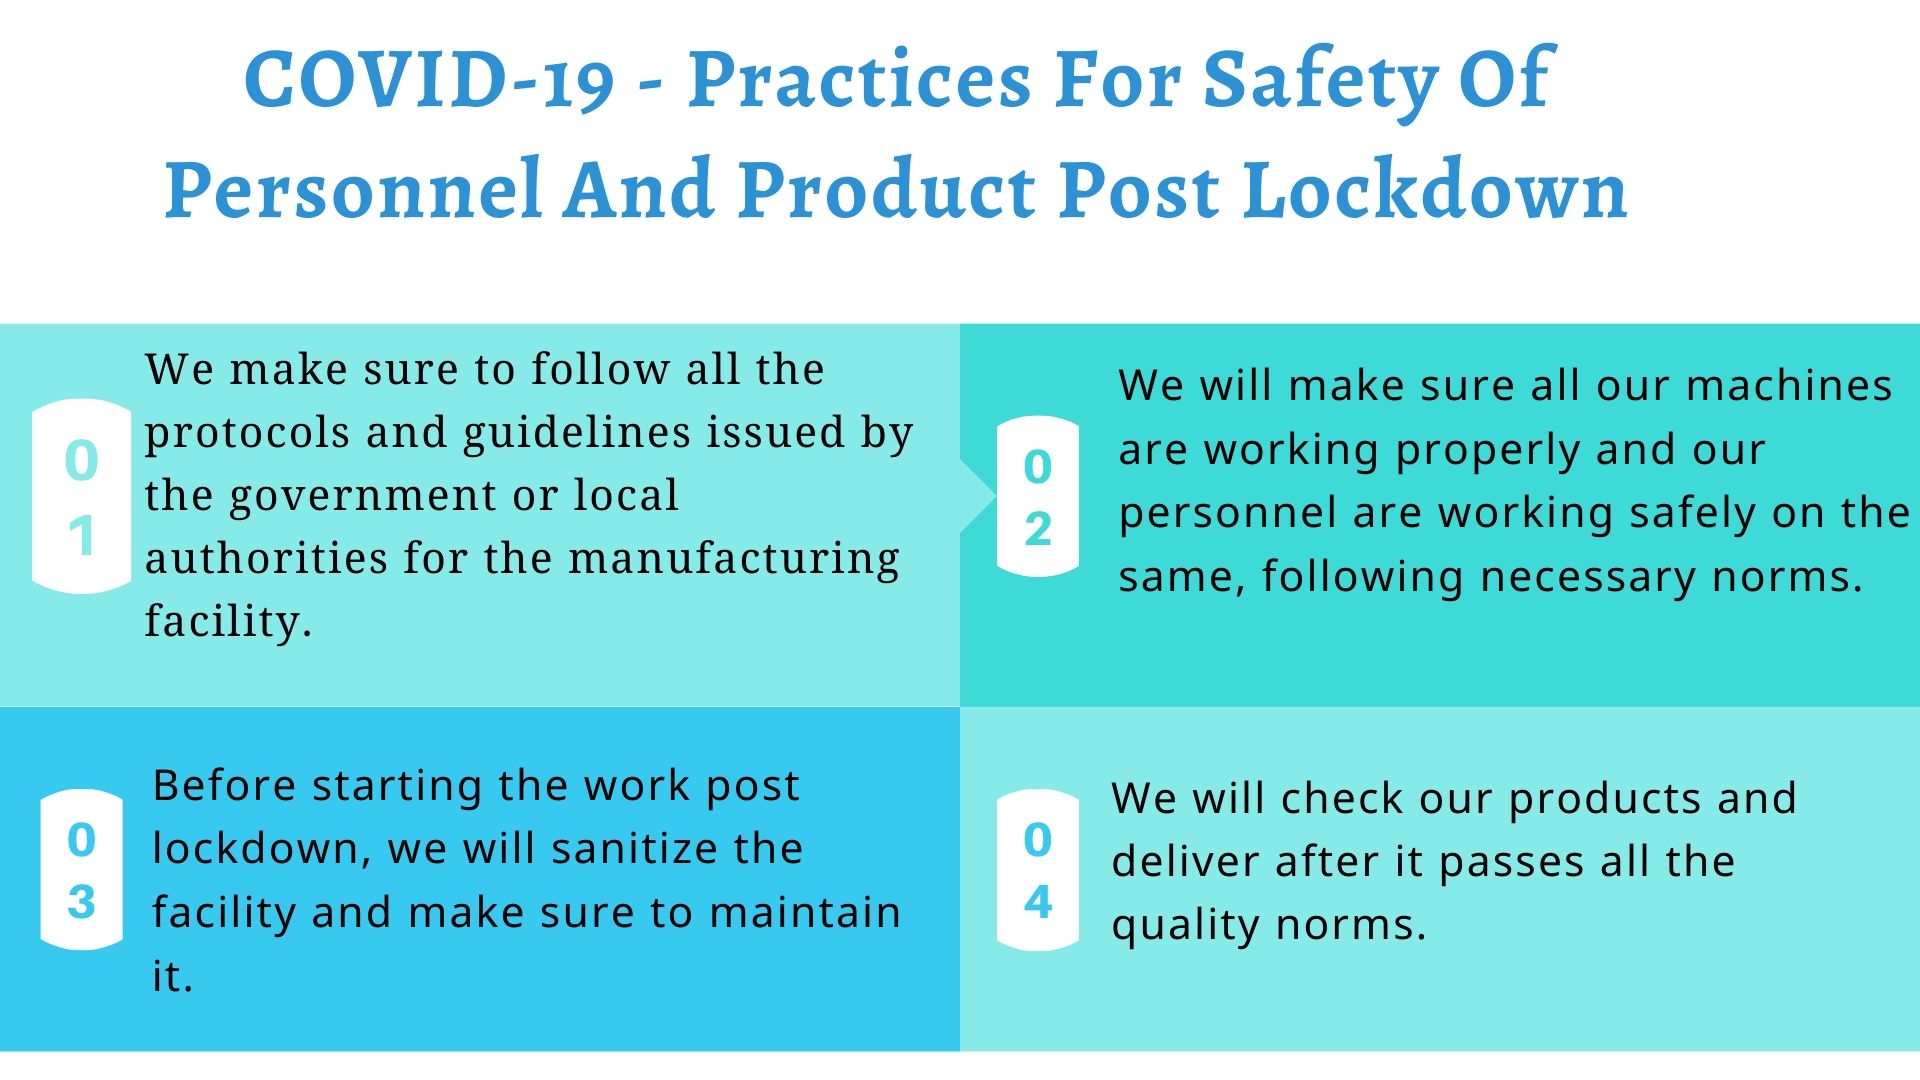 COVID-19 - Practices For Safety Of Personnel And Product Post Lockdown